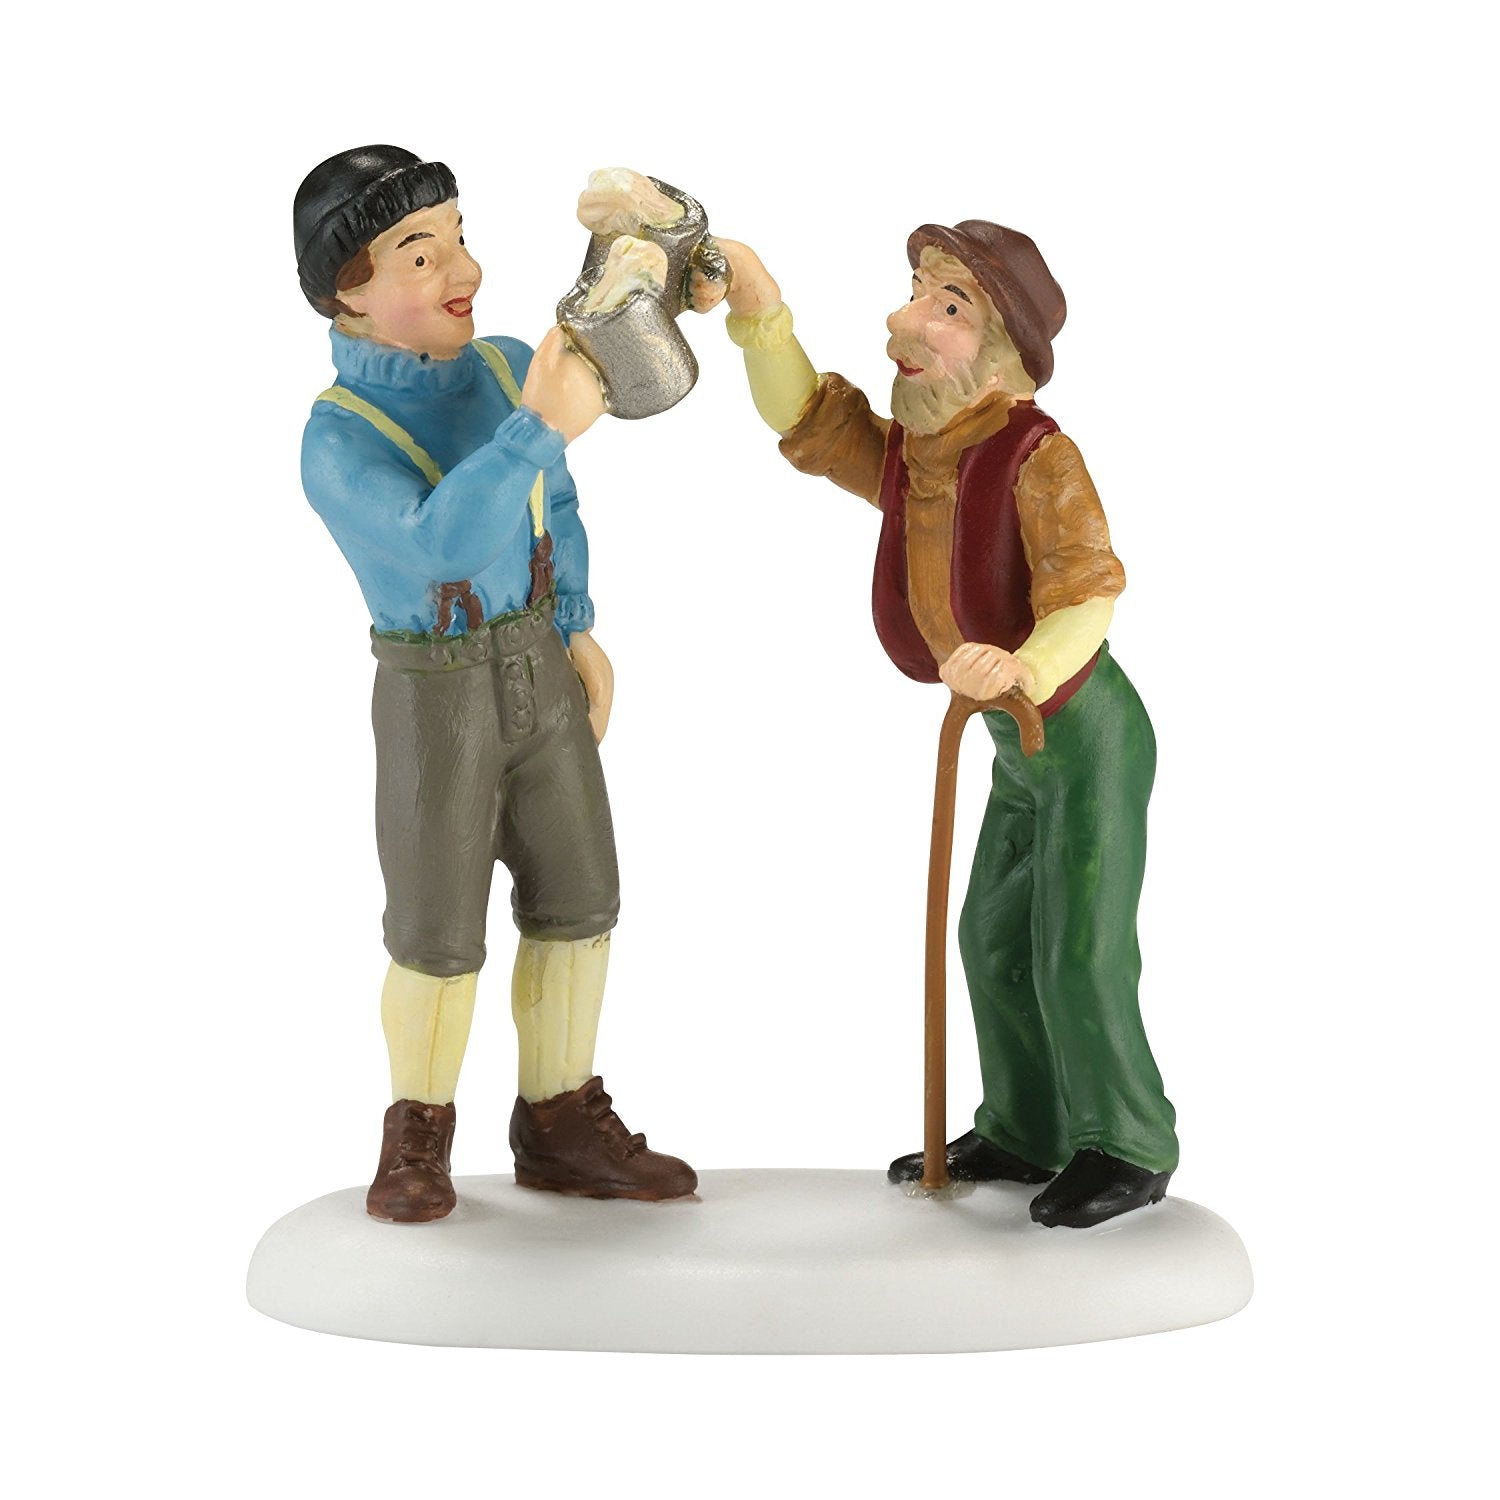 Department 56 New England Village A Good Day's Fishing Accessory Figurine, 2.5 inch